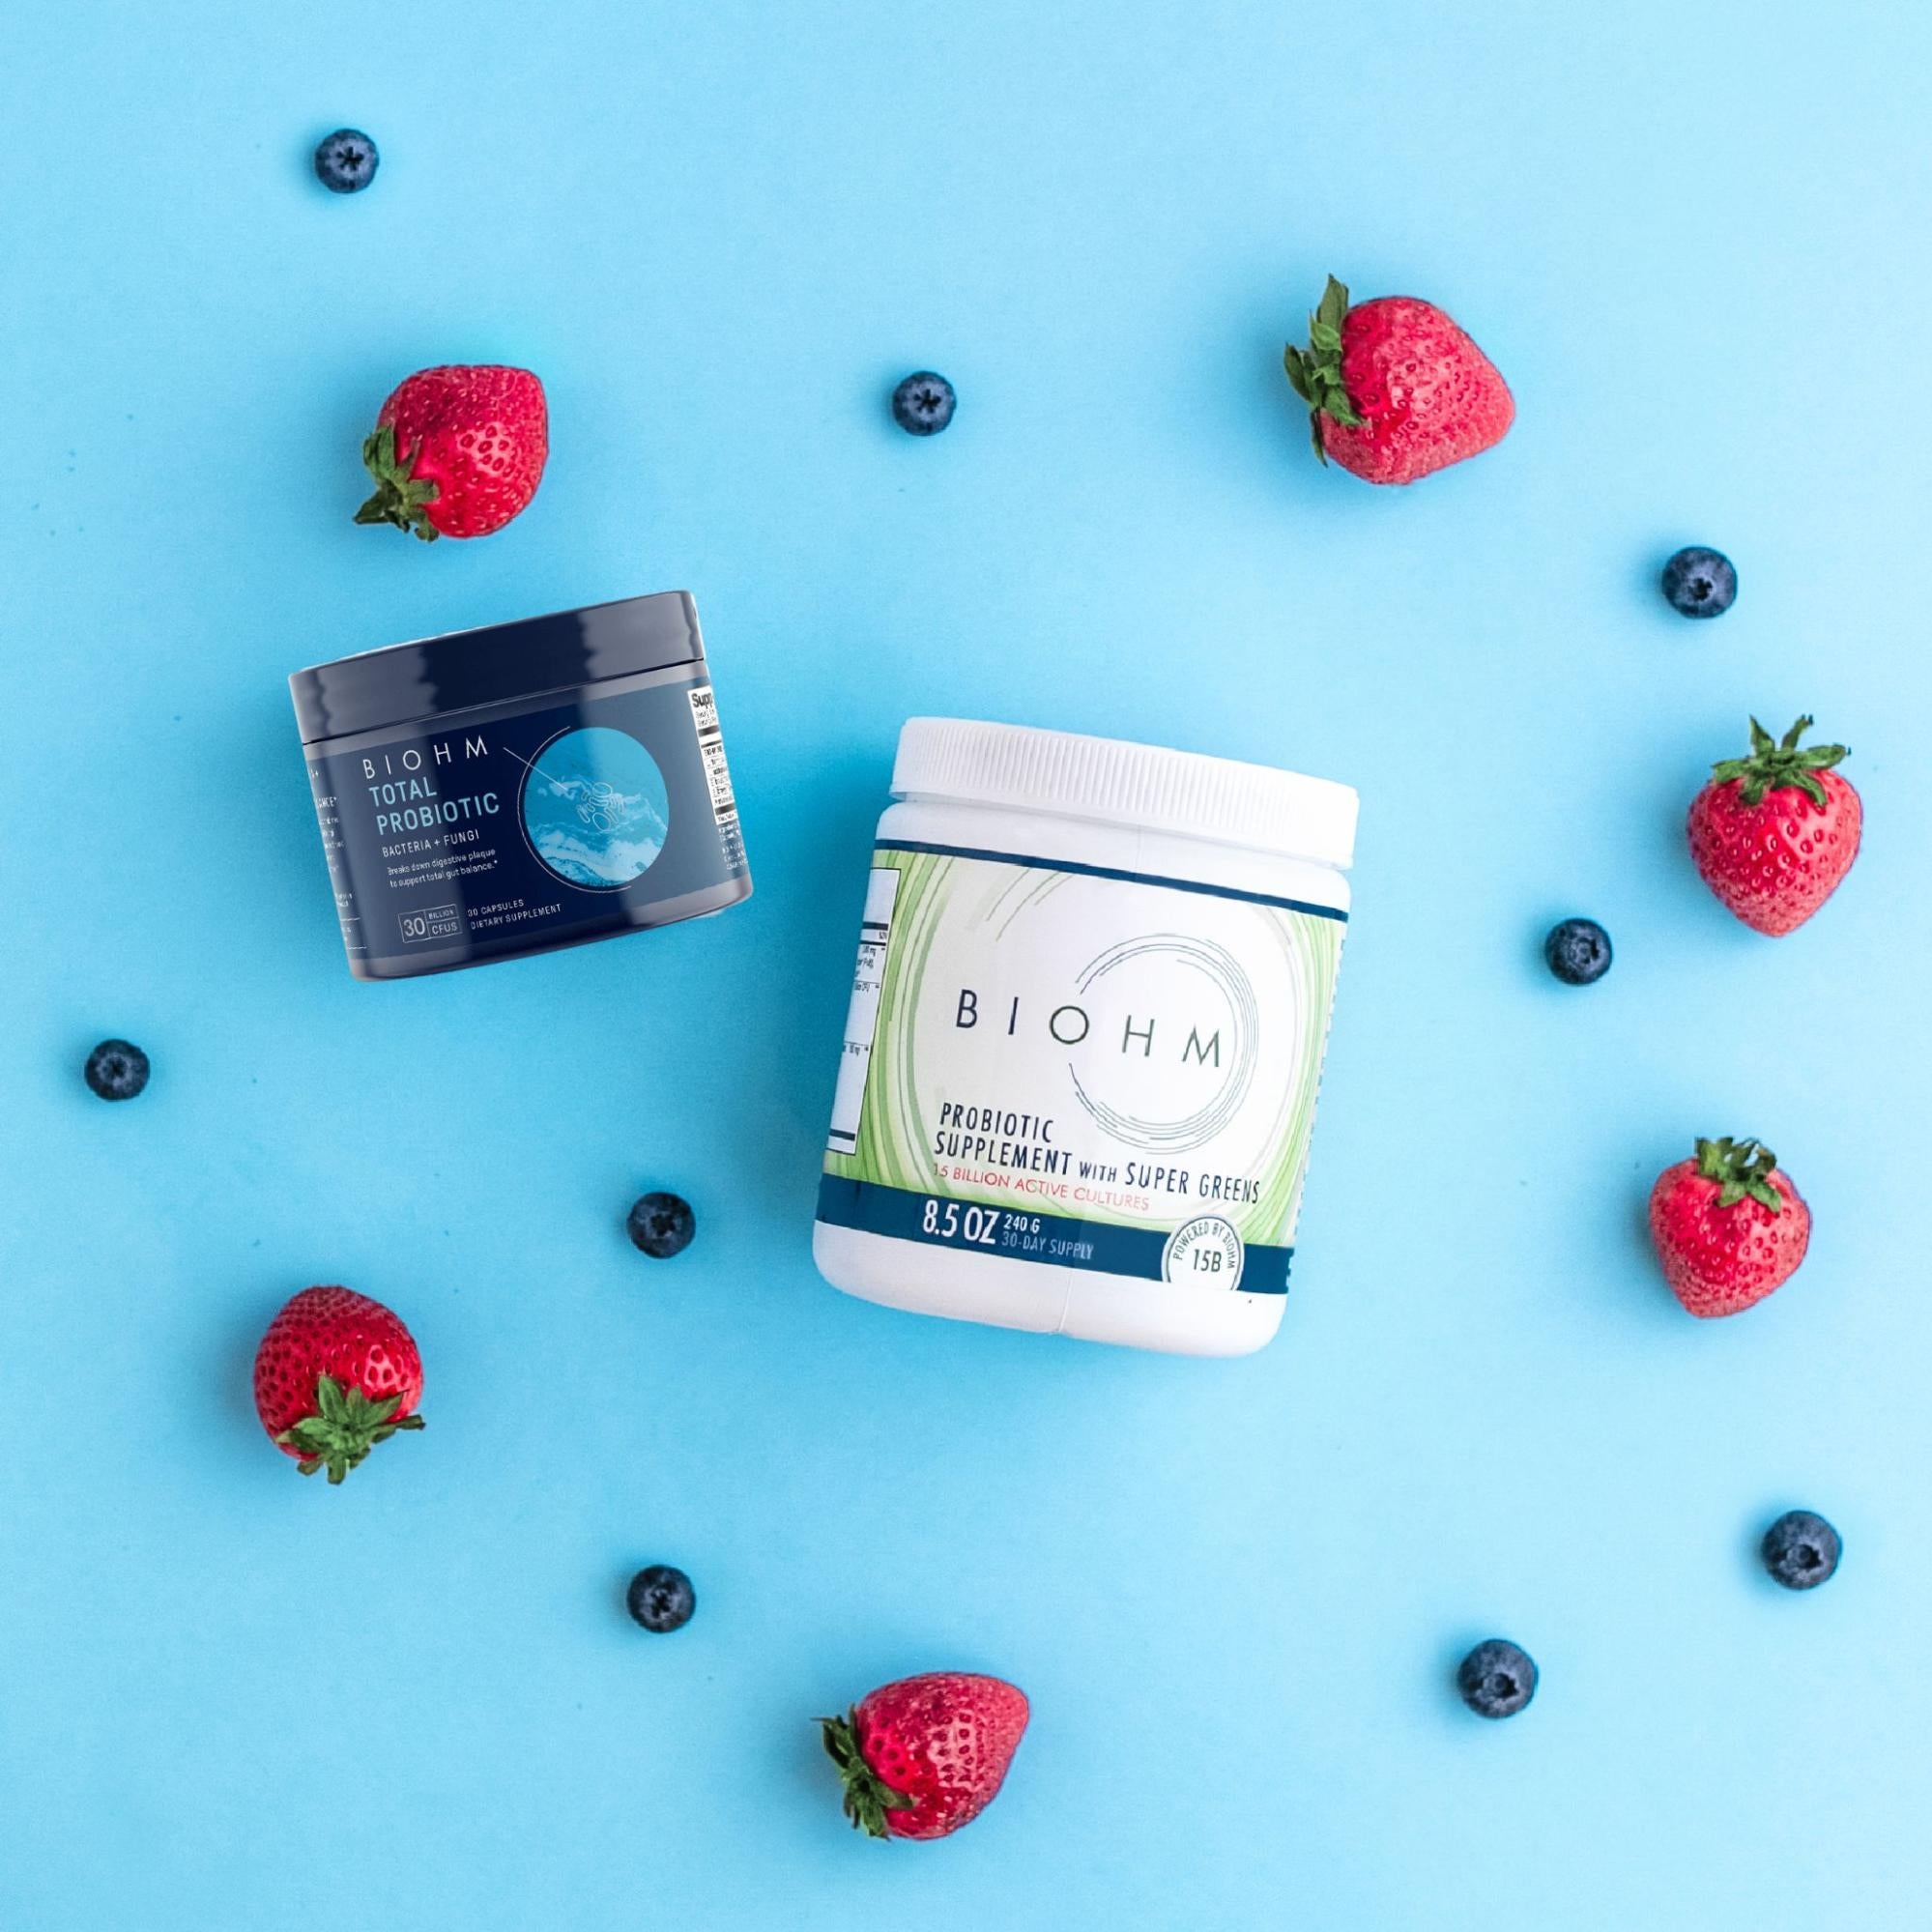 A pair of probiotic supplements from BIOHM Health against a blue background along with various berries.